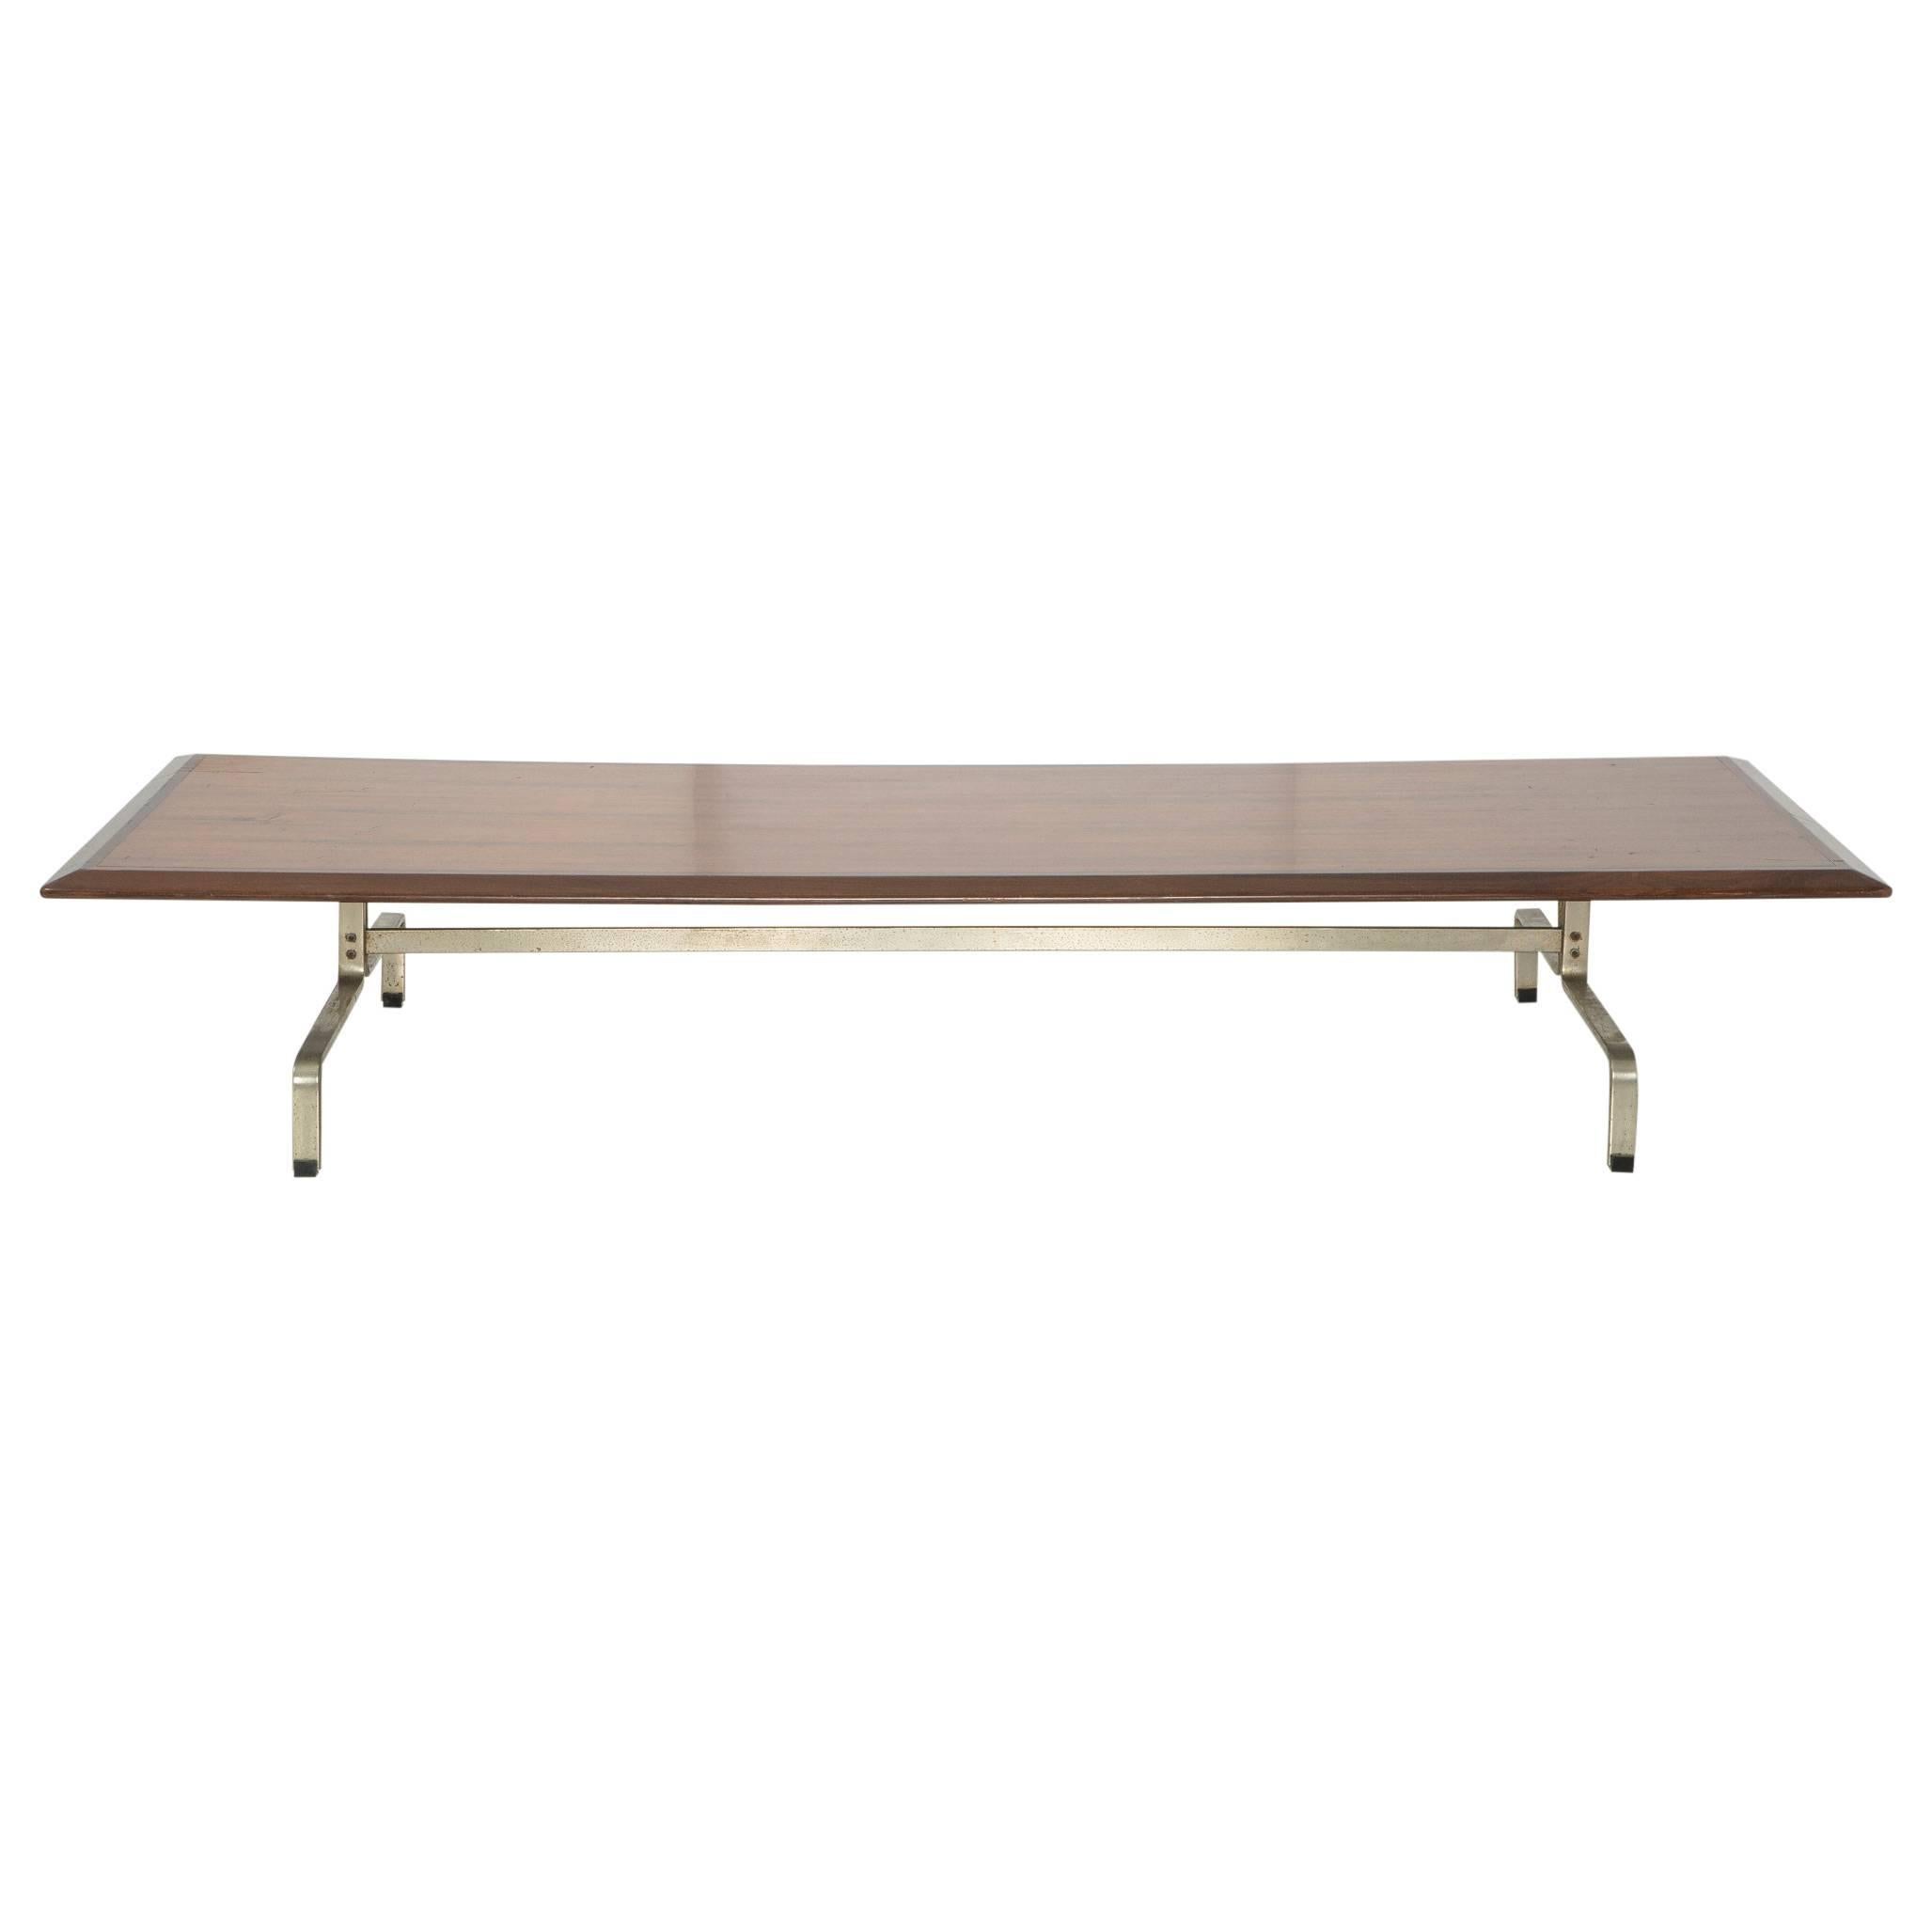 This long and sleek coffee table has an identical and indistinguishable base that matches the PK-31 series by Poul Kjaerholm for E. Kold Christensen. While we have never seen another example of this coffee table, it is possible that this was a